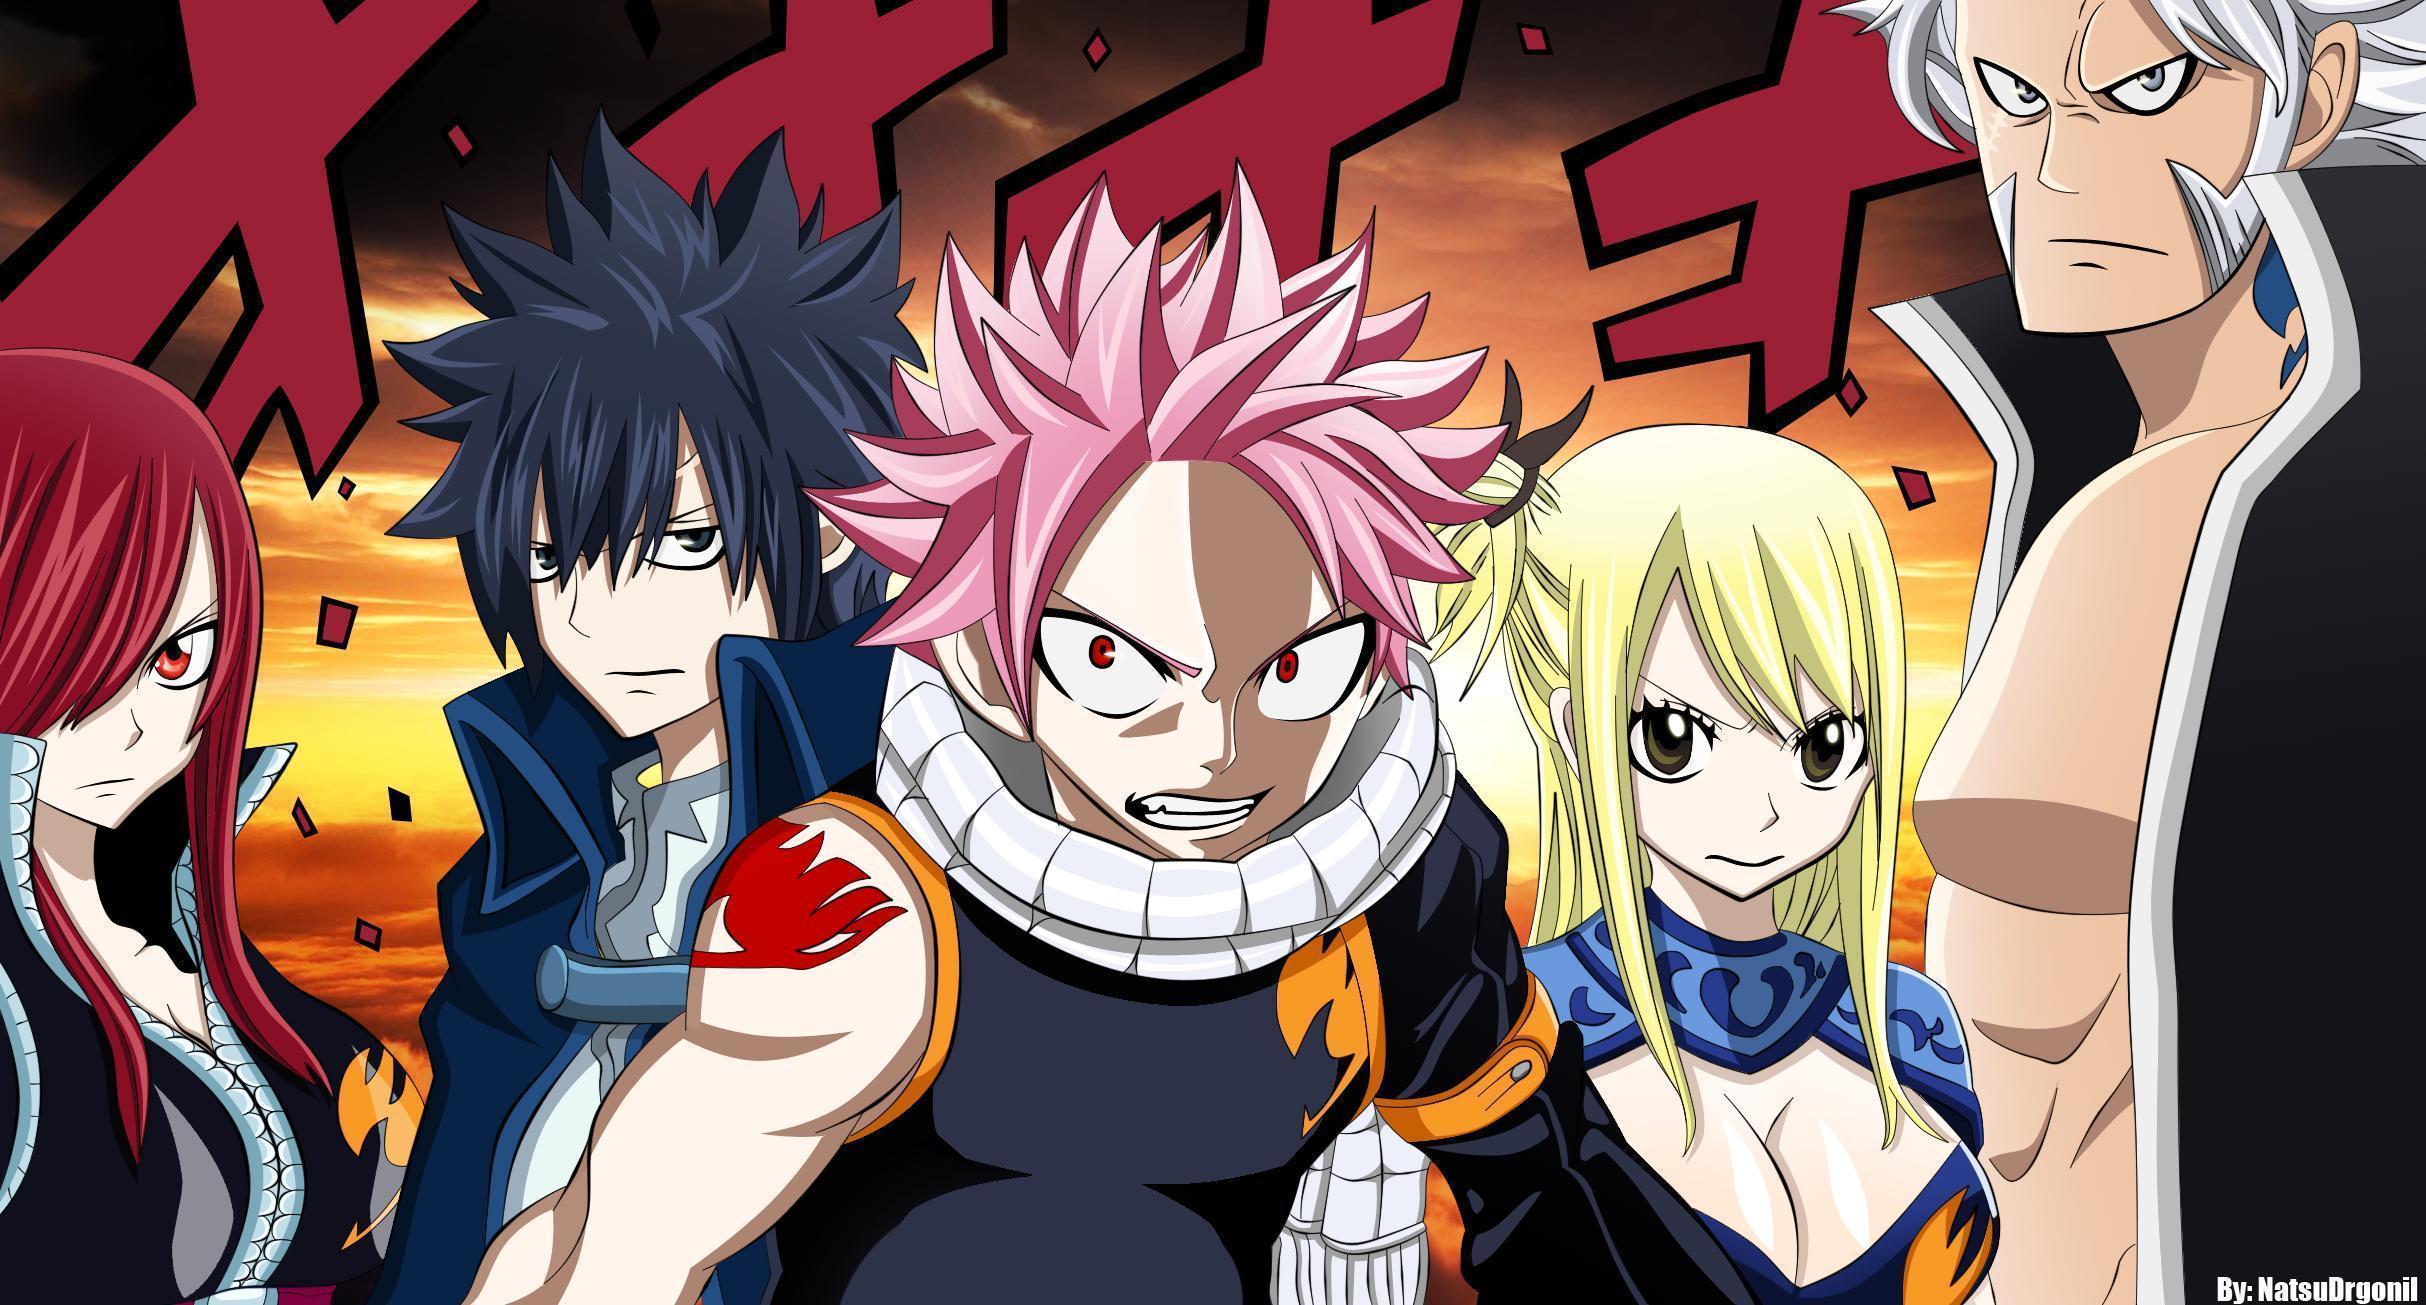 Fairy Tail Wallpapers